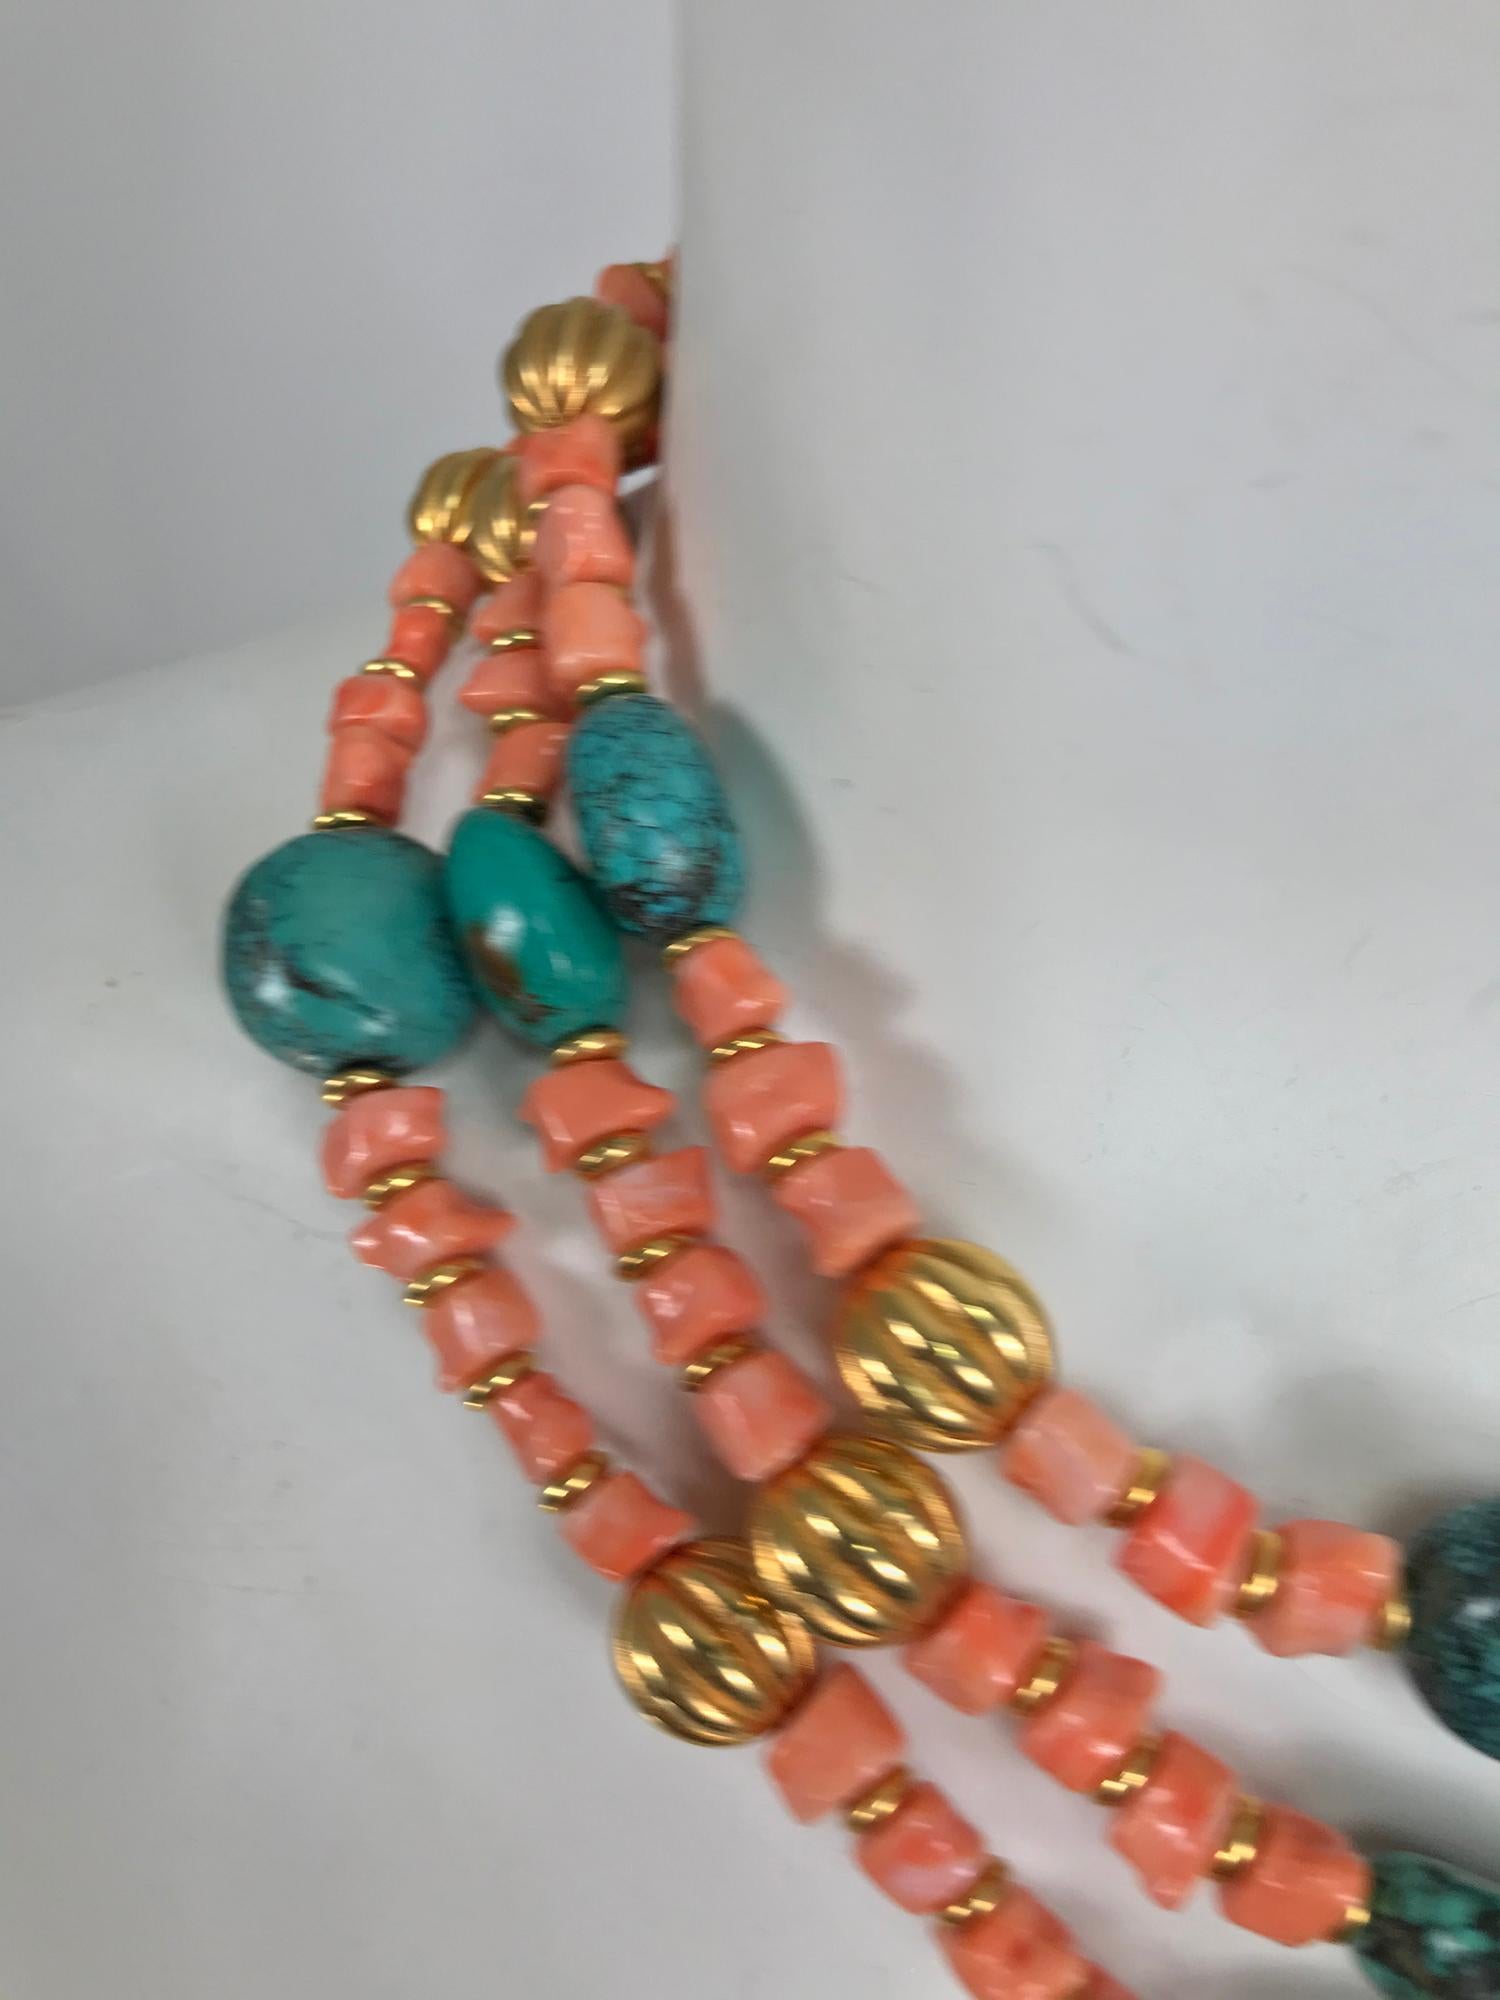 kenneth lane coral necklace